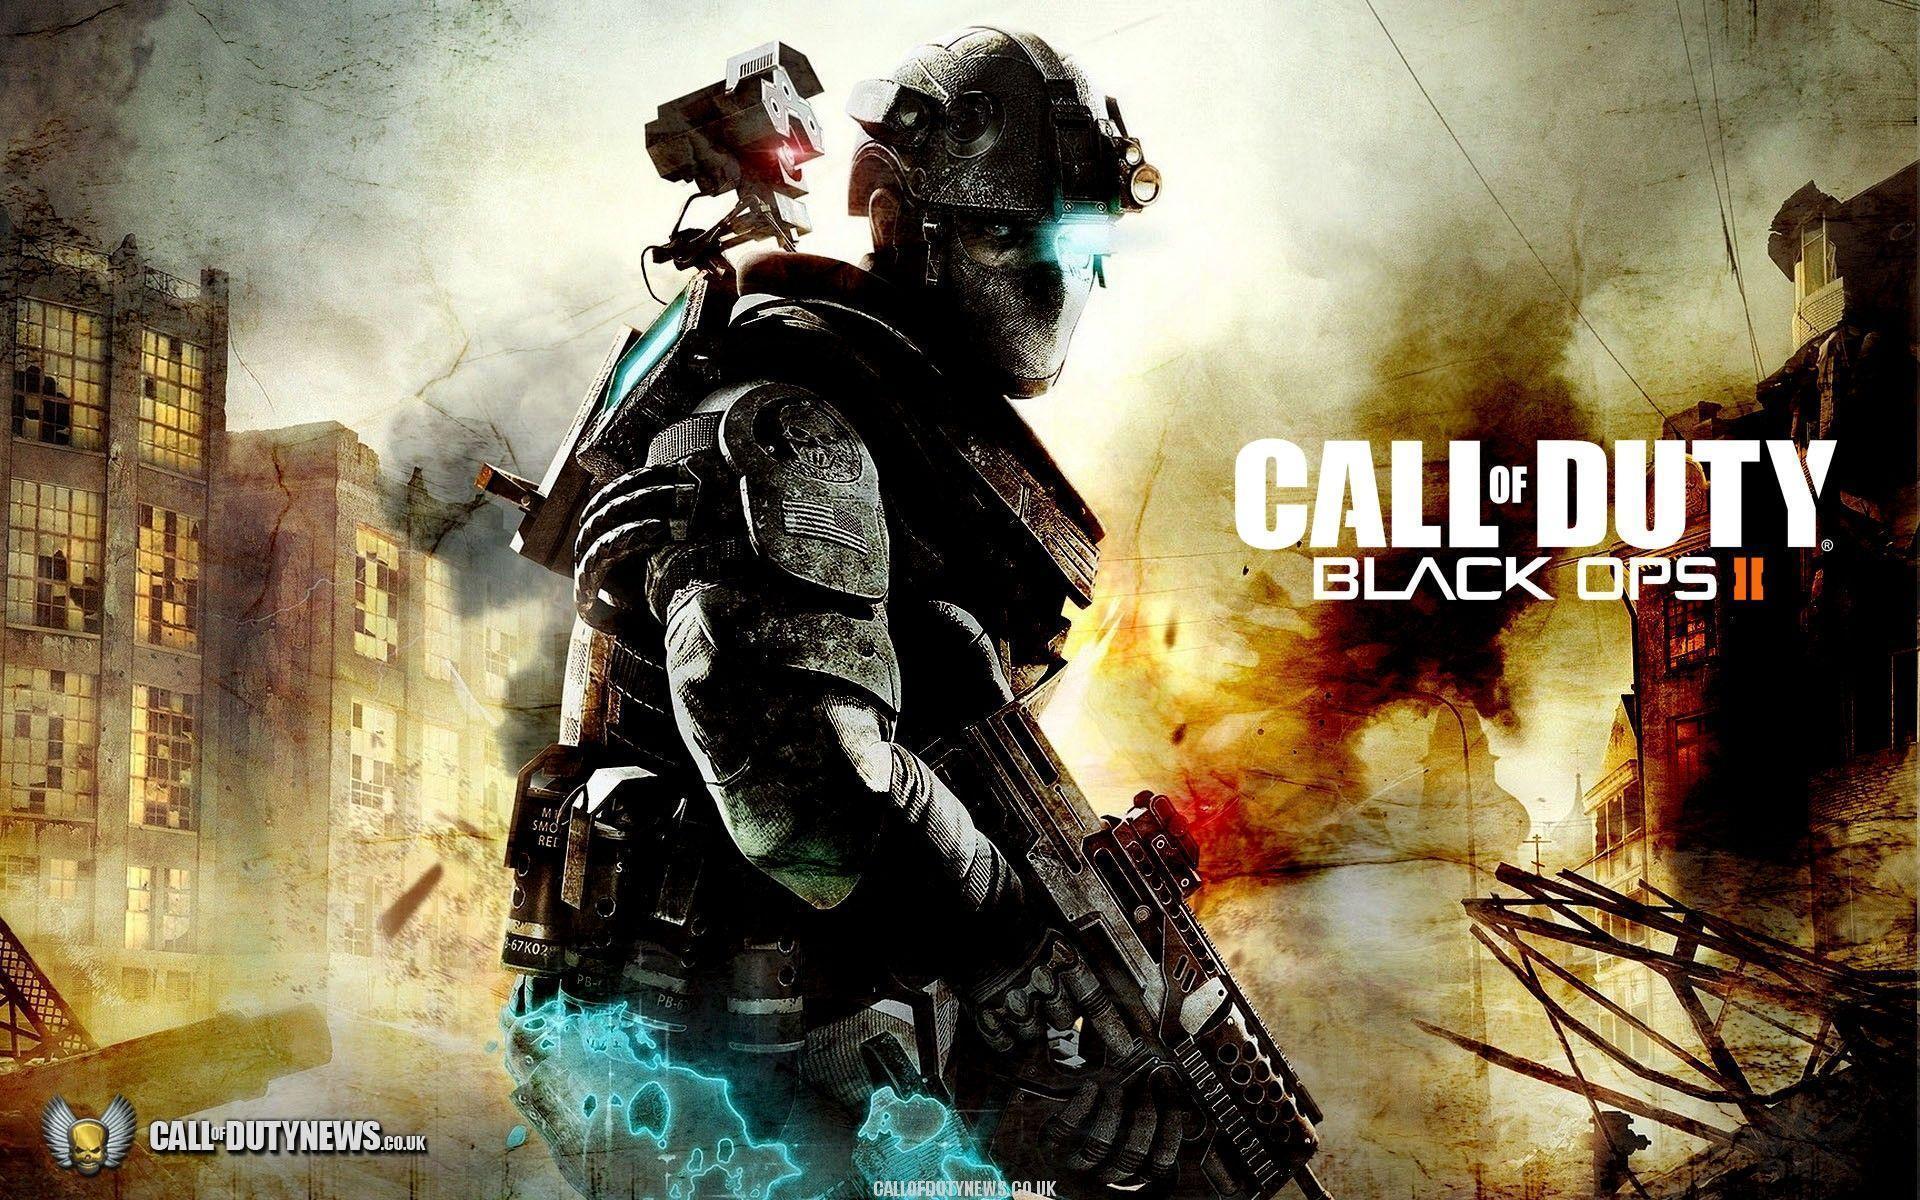 Collection of Call Of Duty Black Ops 2 Wallpaper on HDWallpaper